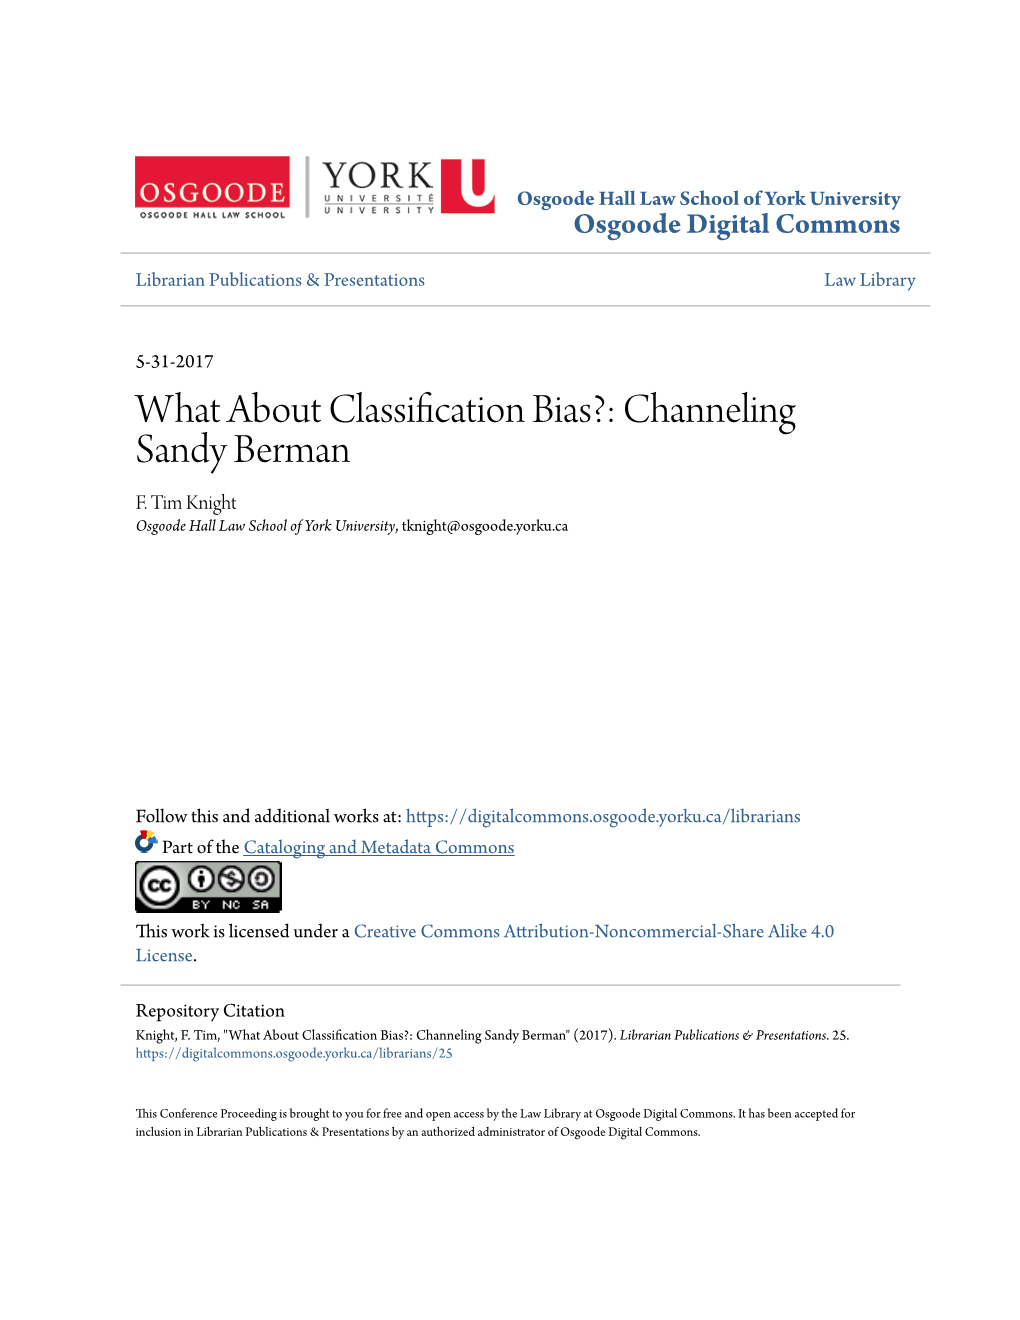 What About Classification Bias?: Channeling Sandy Berman F